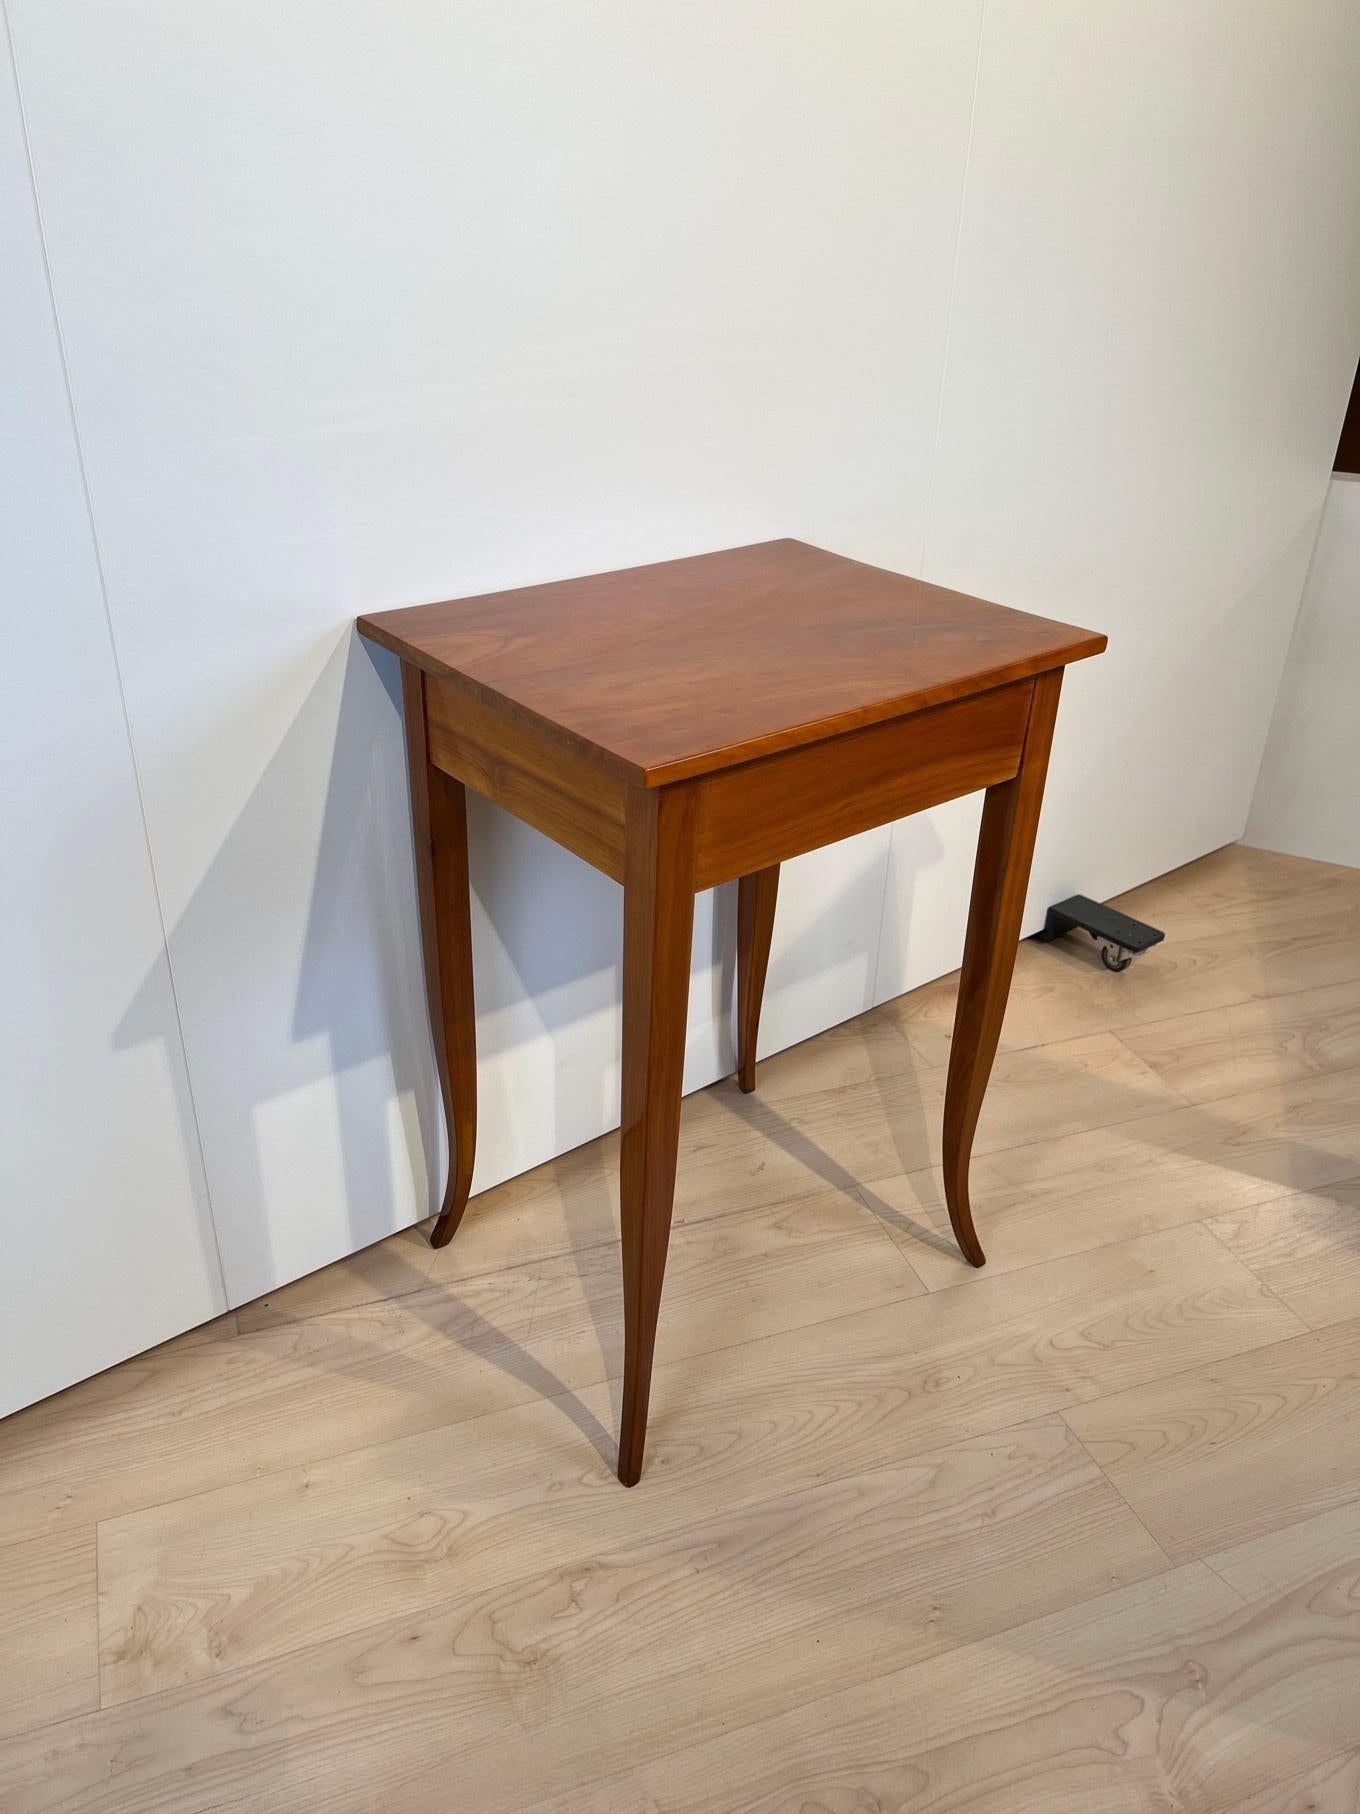 Biedermeier Side Table with Drawer, Cherry Wood, South Germany circa 1825 For Sale 2